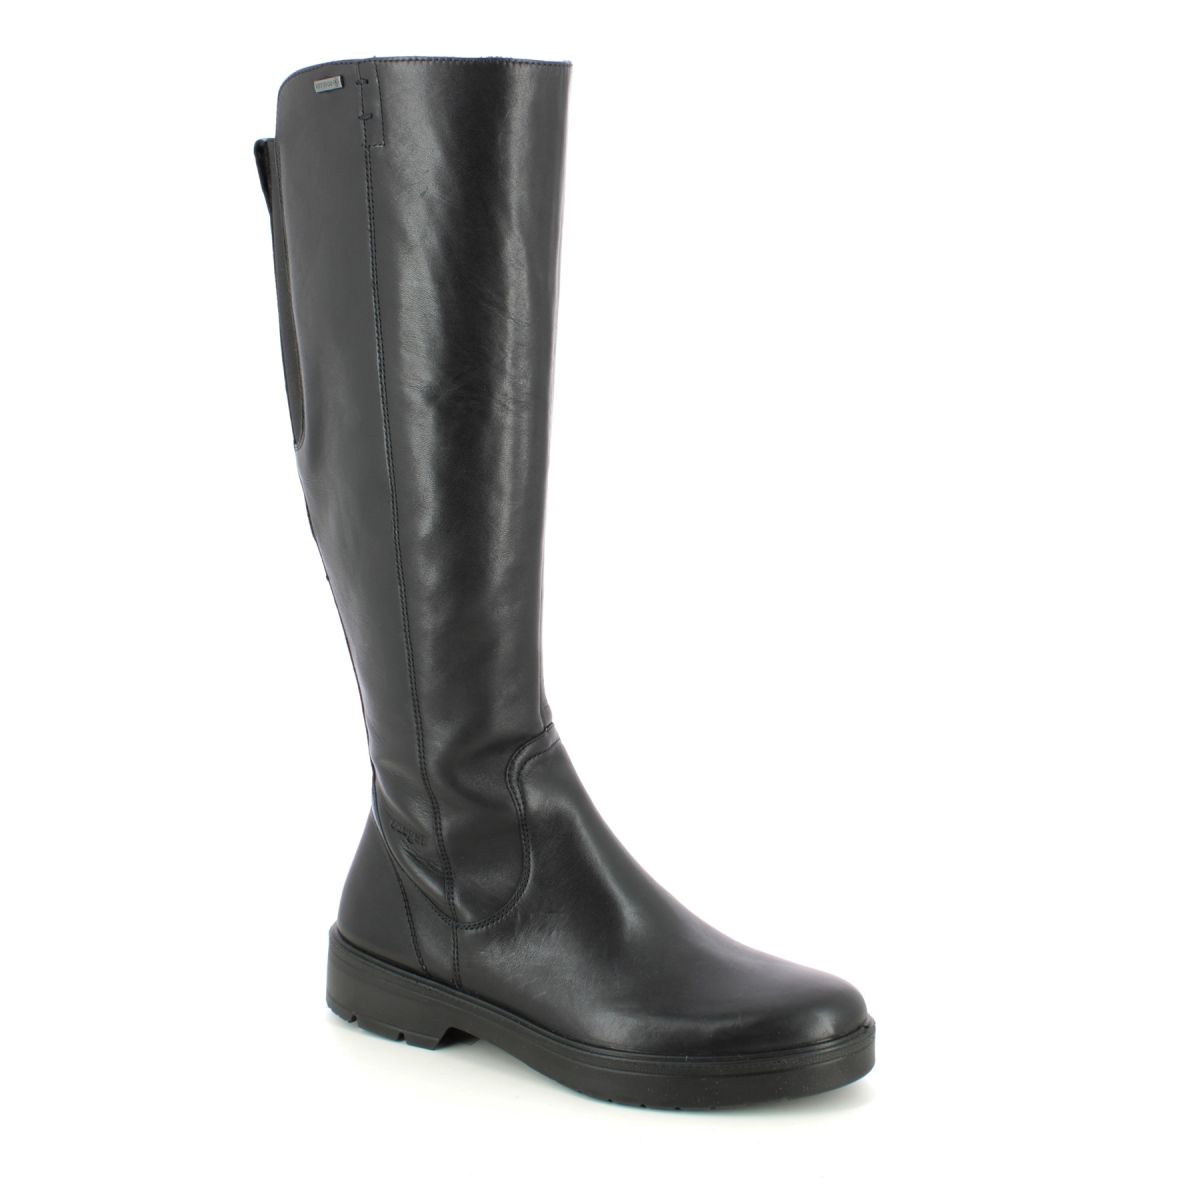 Legero Mystic Long Gtx Black Leather Womens Knee-High Boots 2000195-0100 In Size 8 In Plain Black Leather